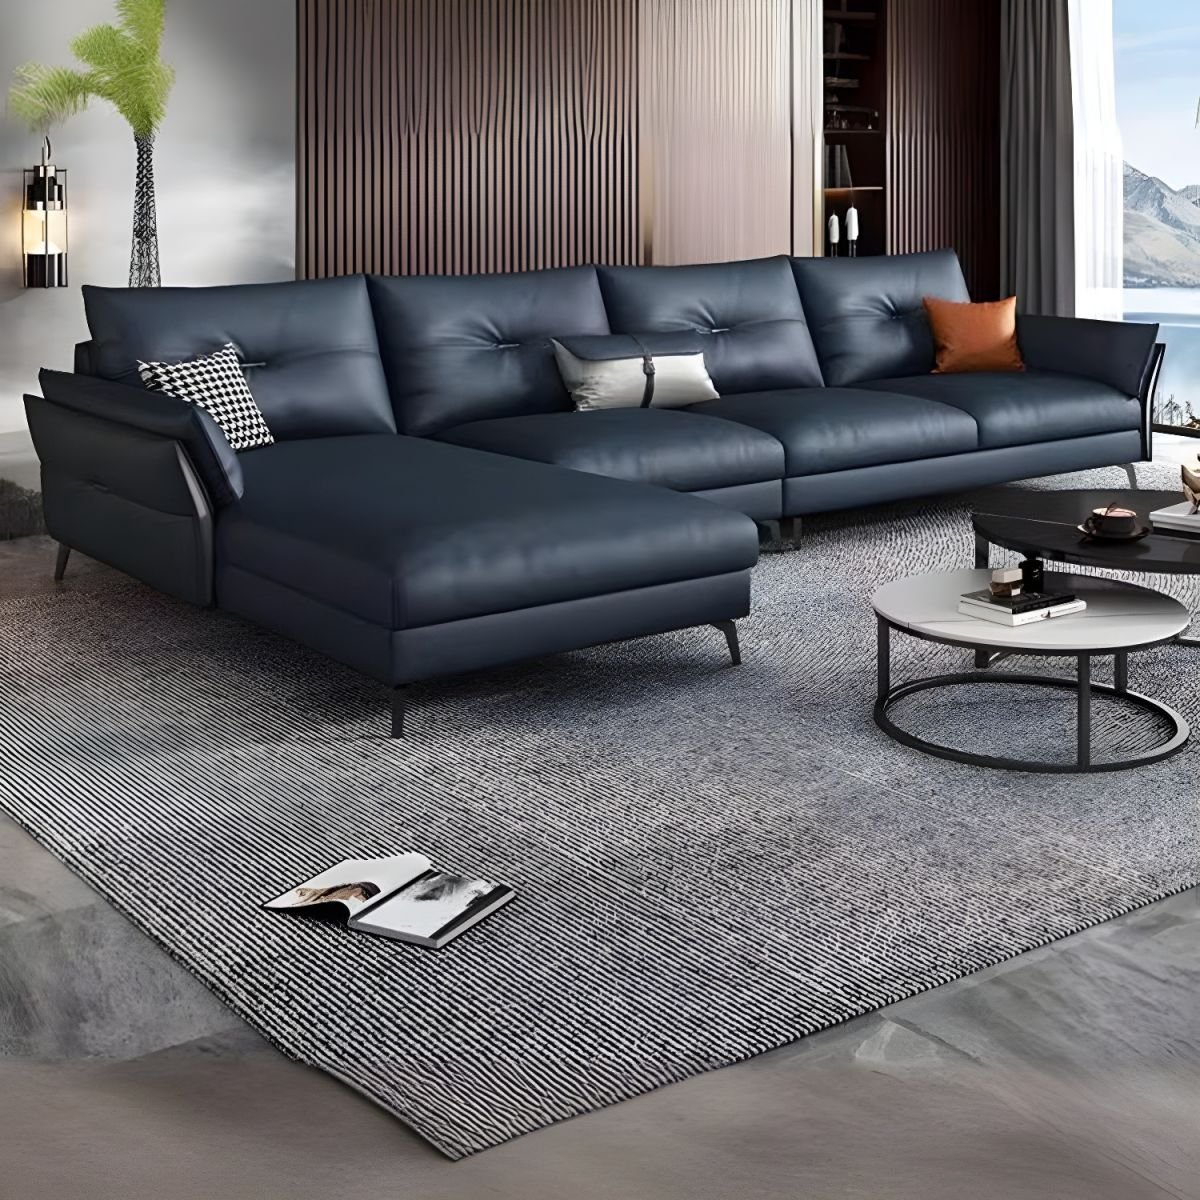 Faux Leather Modern Sectional Sofa with Flared Arm and Water Resistant - Blue 126"L x 67"W x 31.5"H Tech Cloth